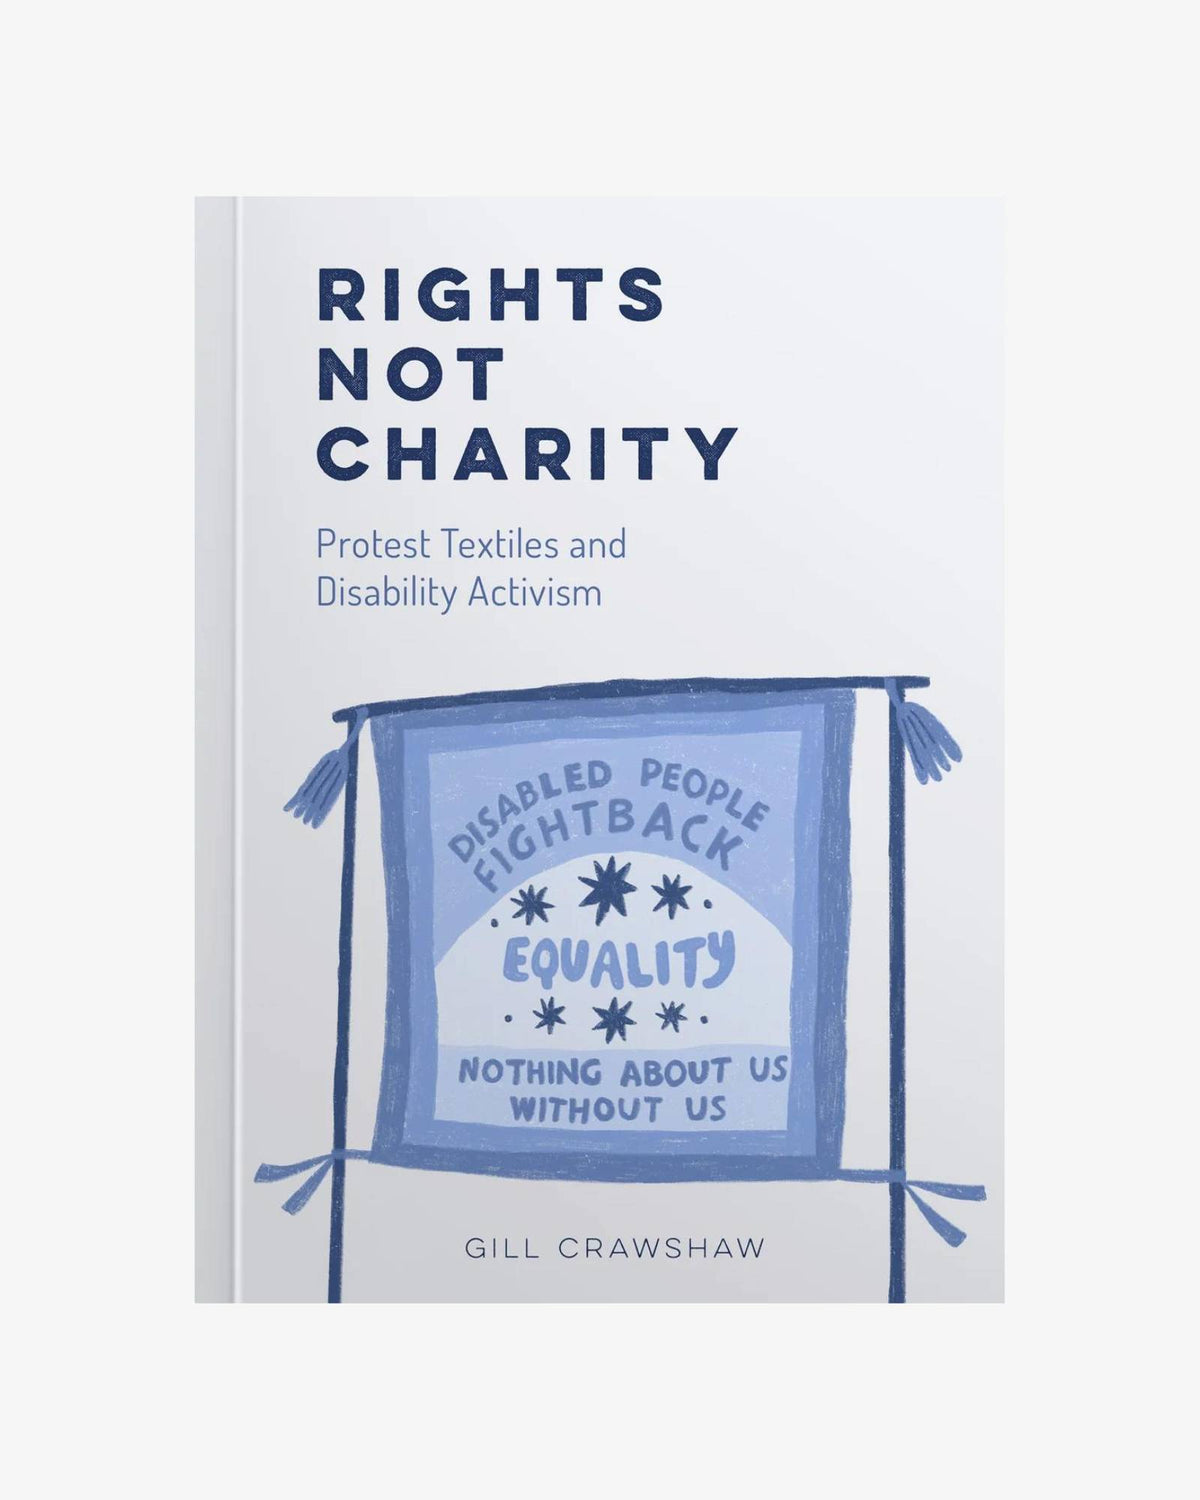 Rights Not Charity: Protest Textiles and Disability Activism by Gill Crawshaw